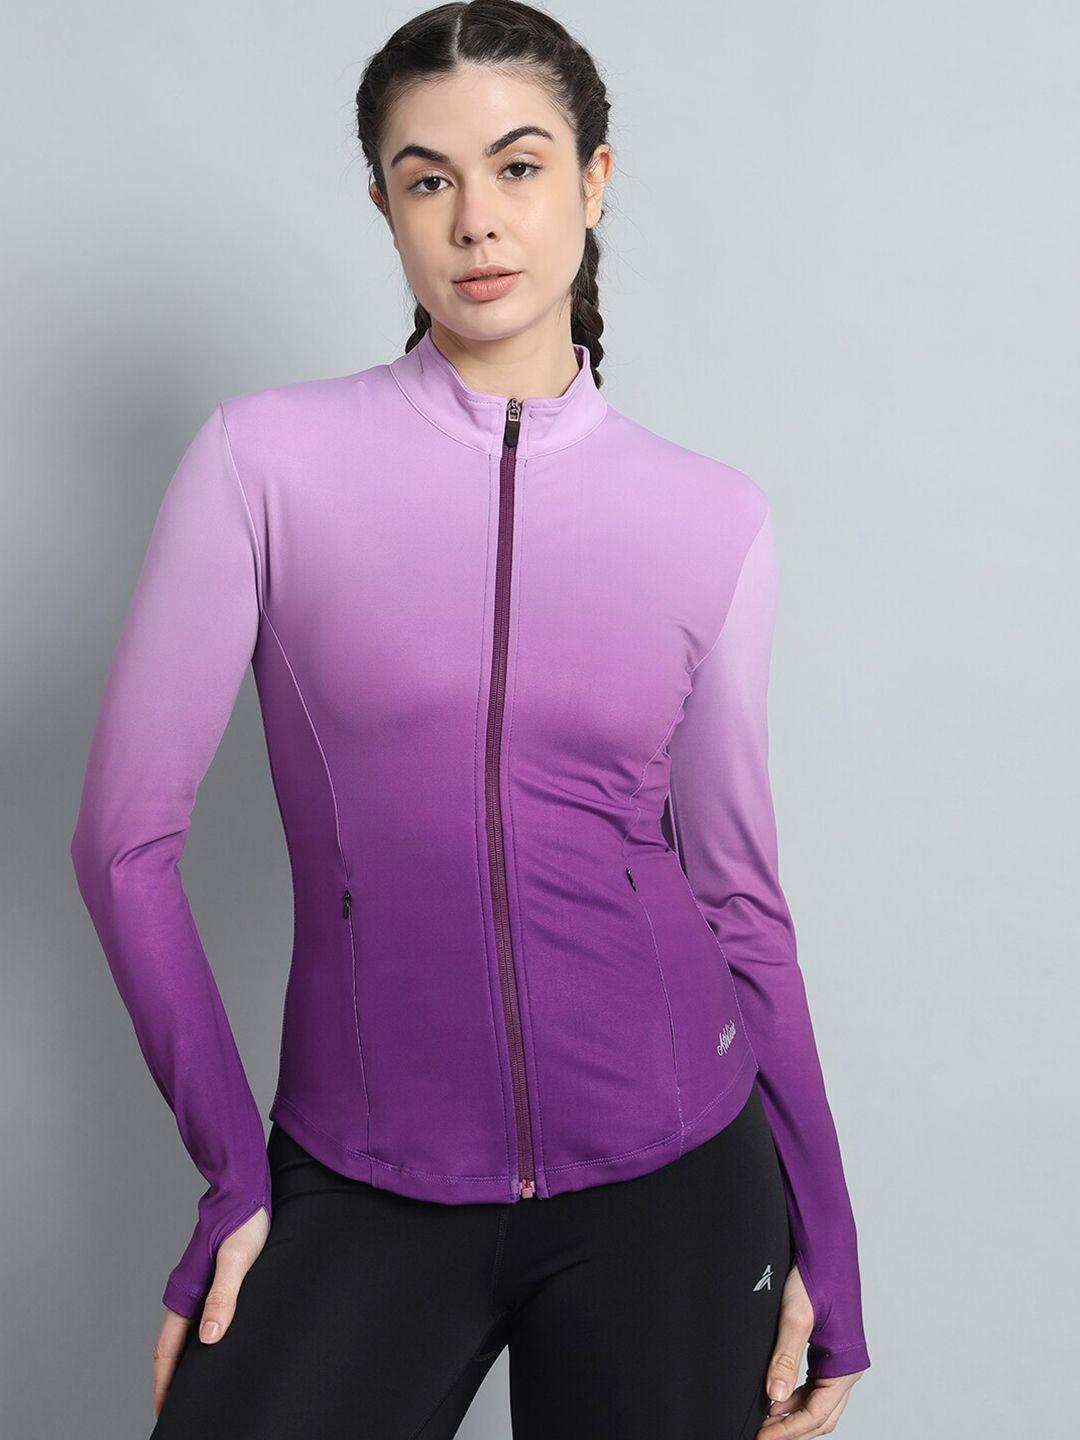 athlisis dry-fit lightweight training or gym sporty jacket